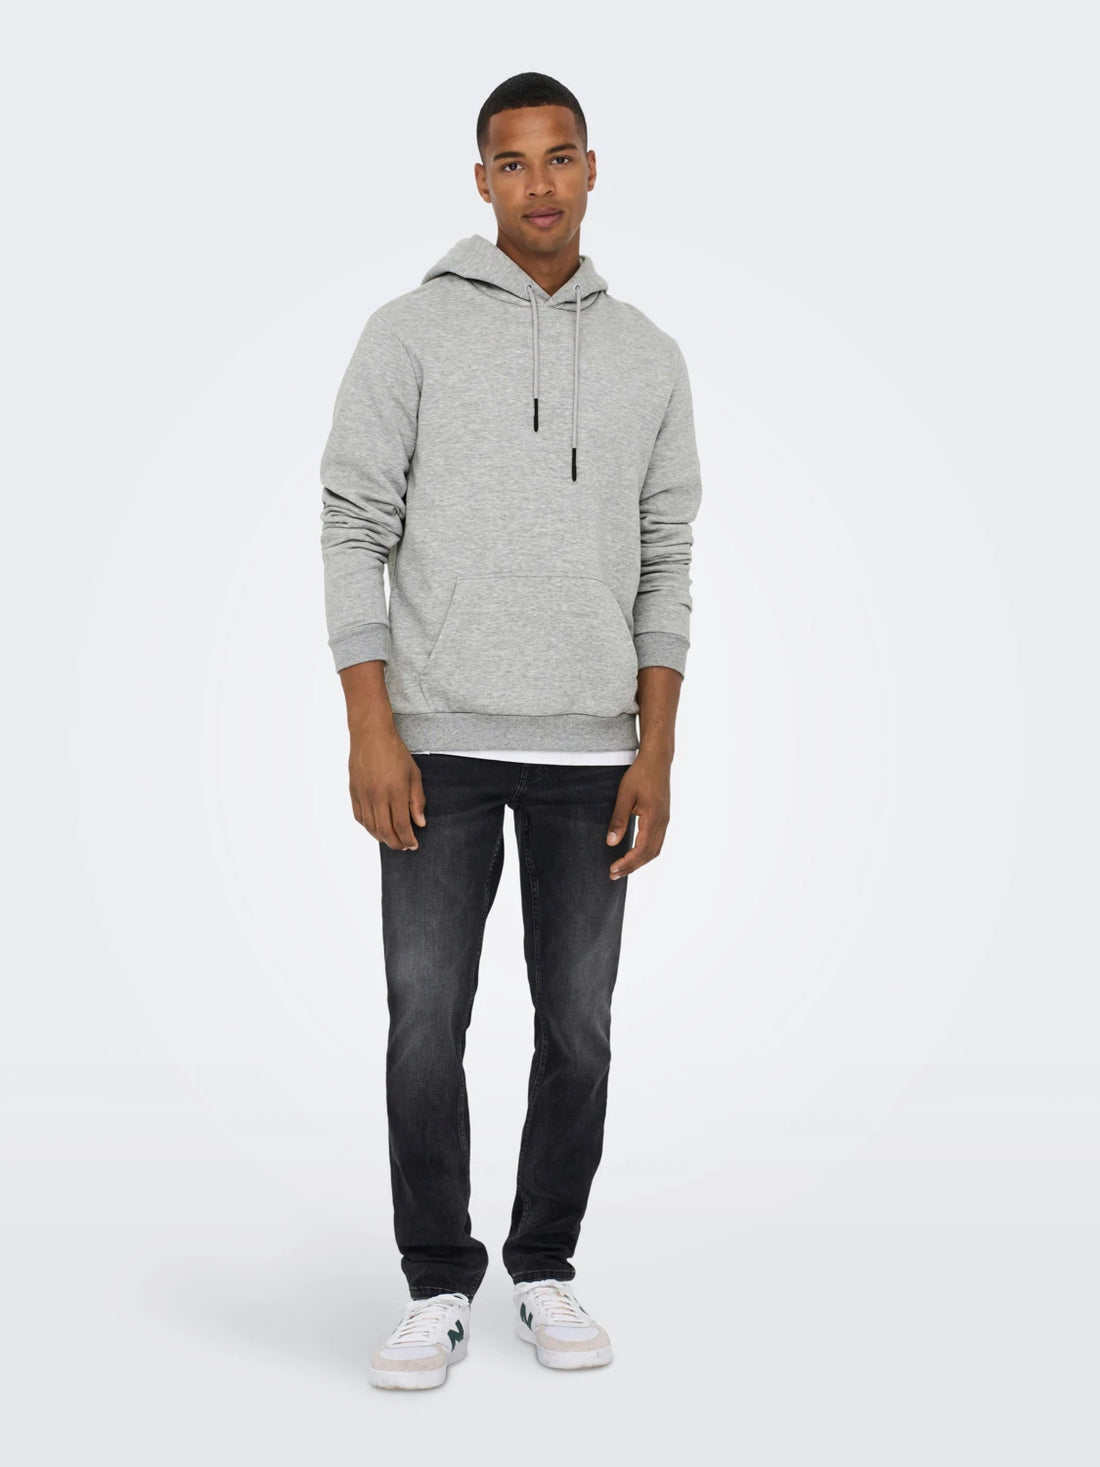 Chandail Ceres Hoodie Gris Chiné Only & Sons